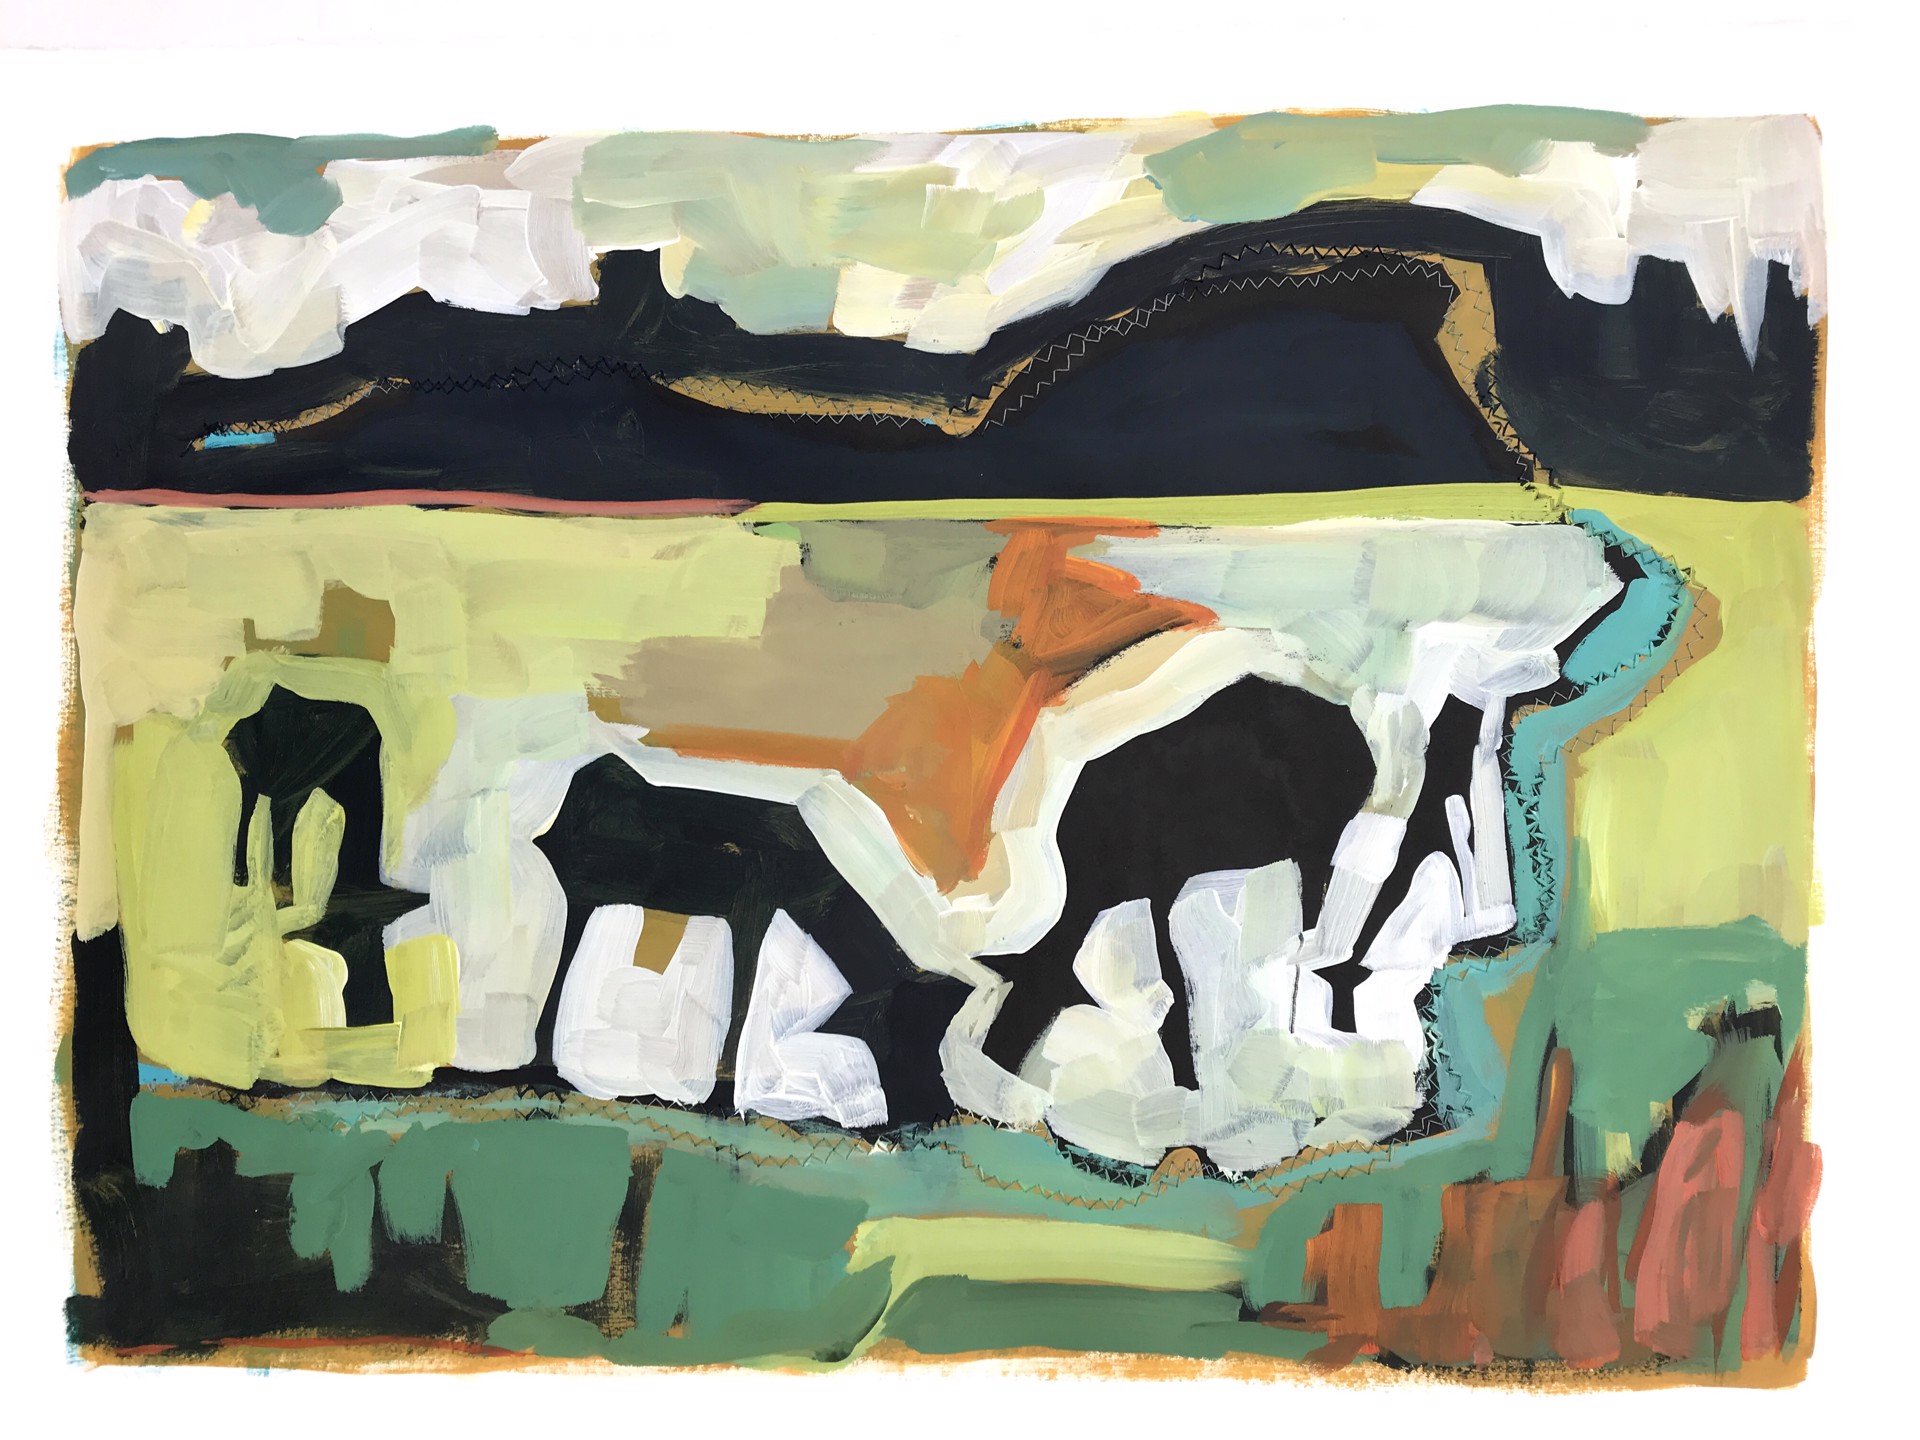 Four cows drinking from creekside by Rachael Van Dyke